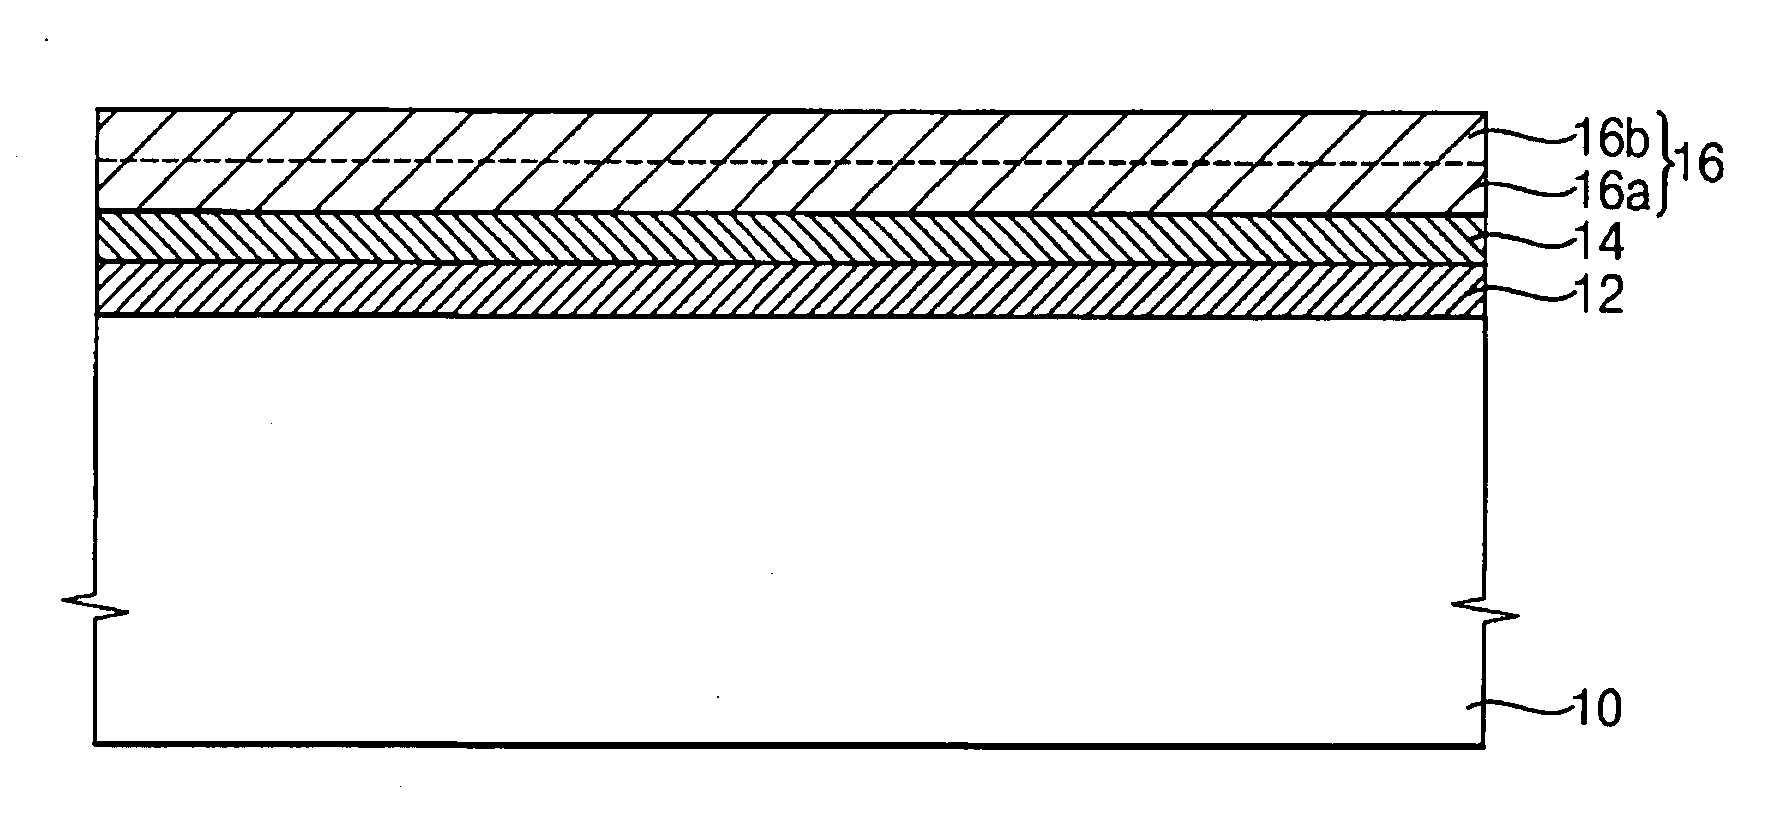 Capacitor and methods of manufacturing the same